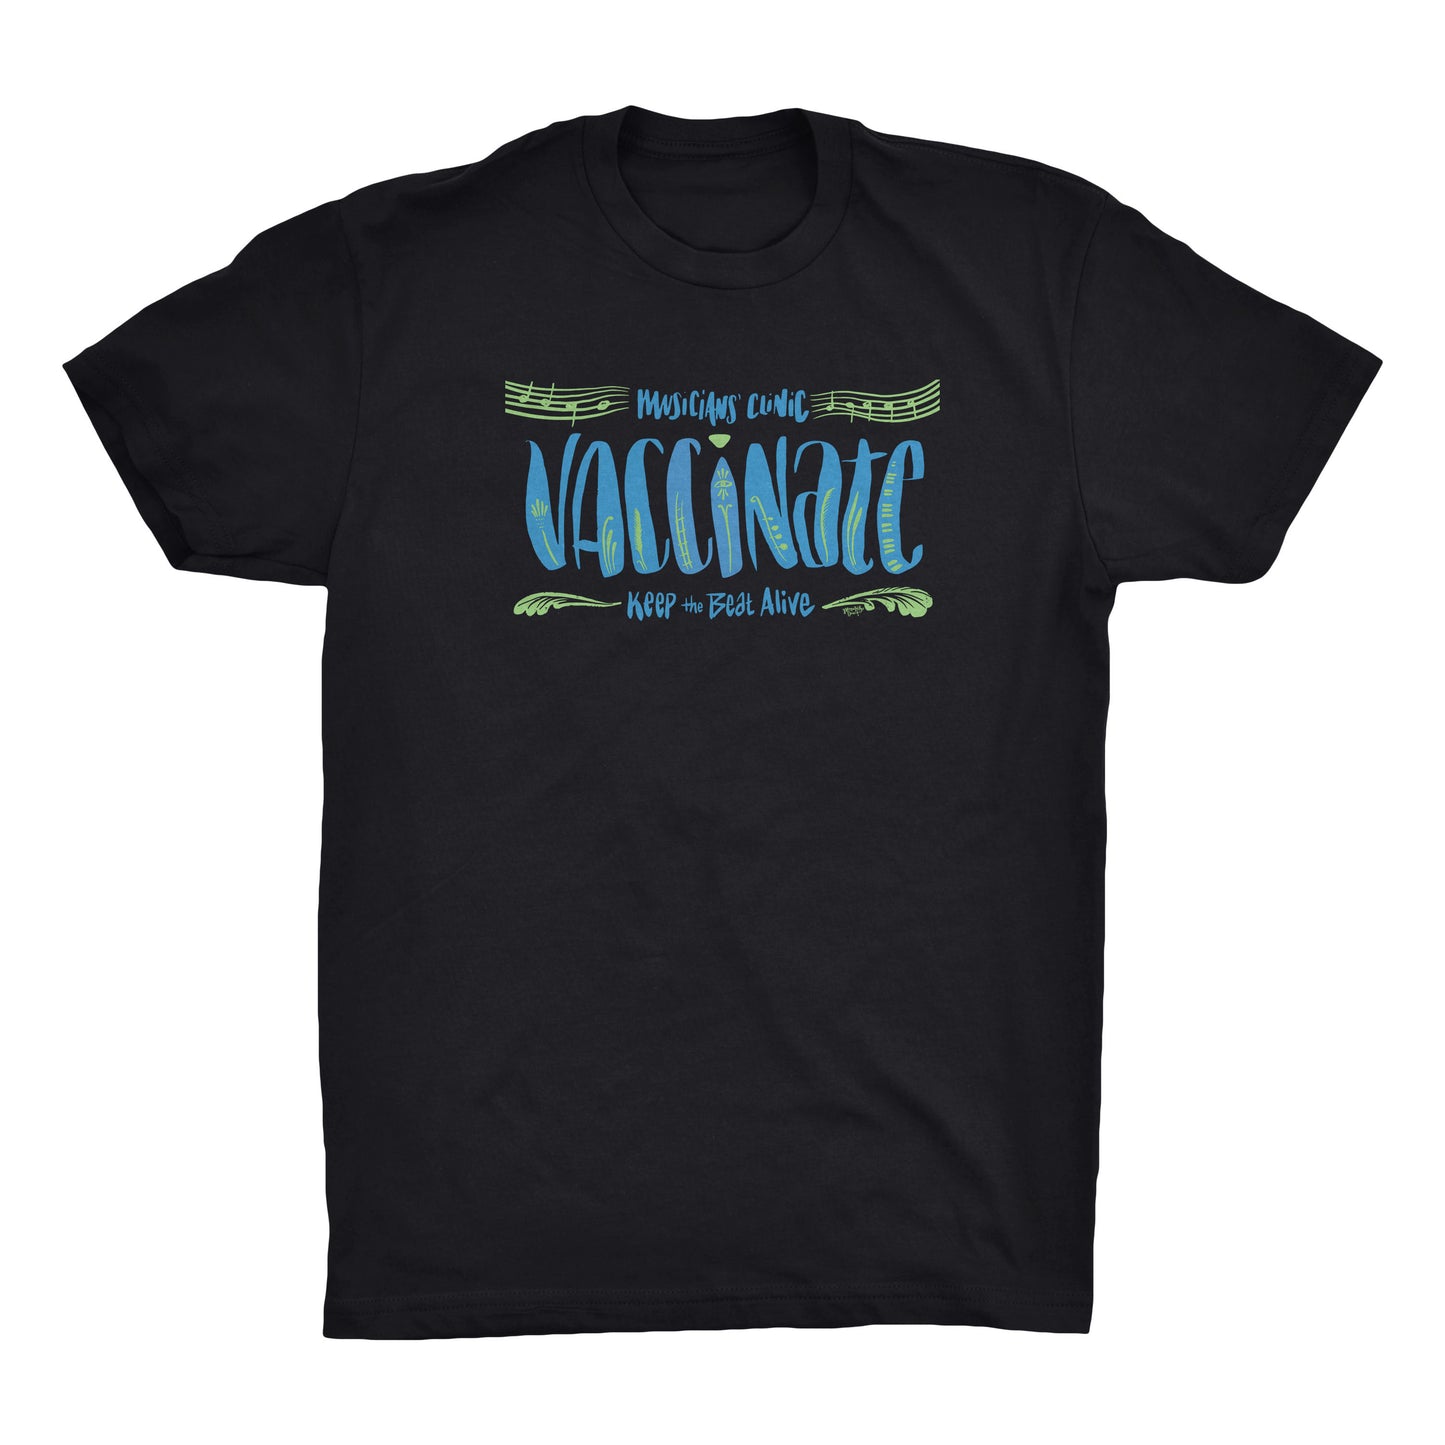 VACCINATE T-Shirt in Black